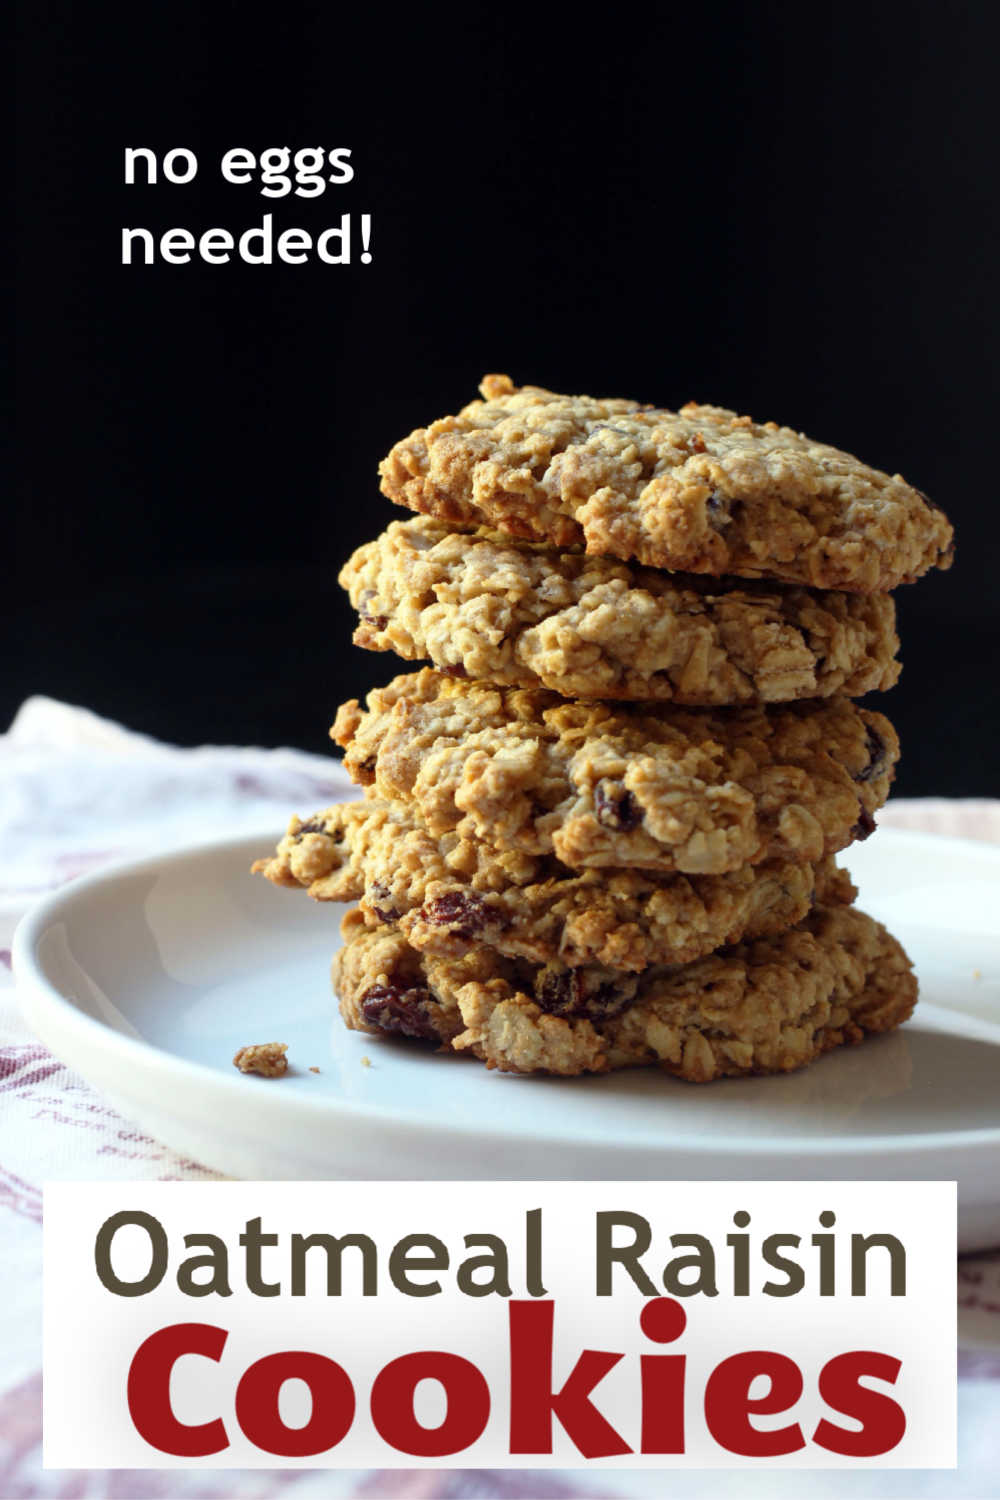 A stack of oatmeal raisin cookies on a plate